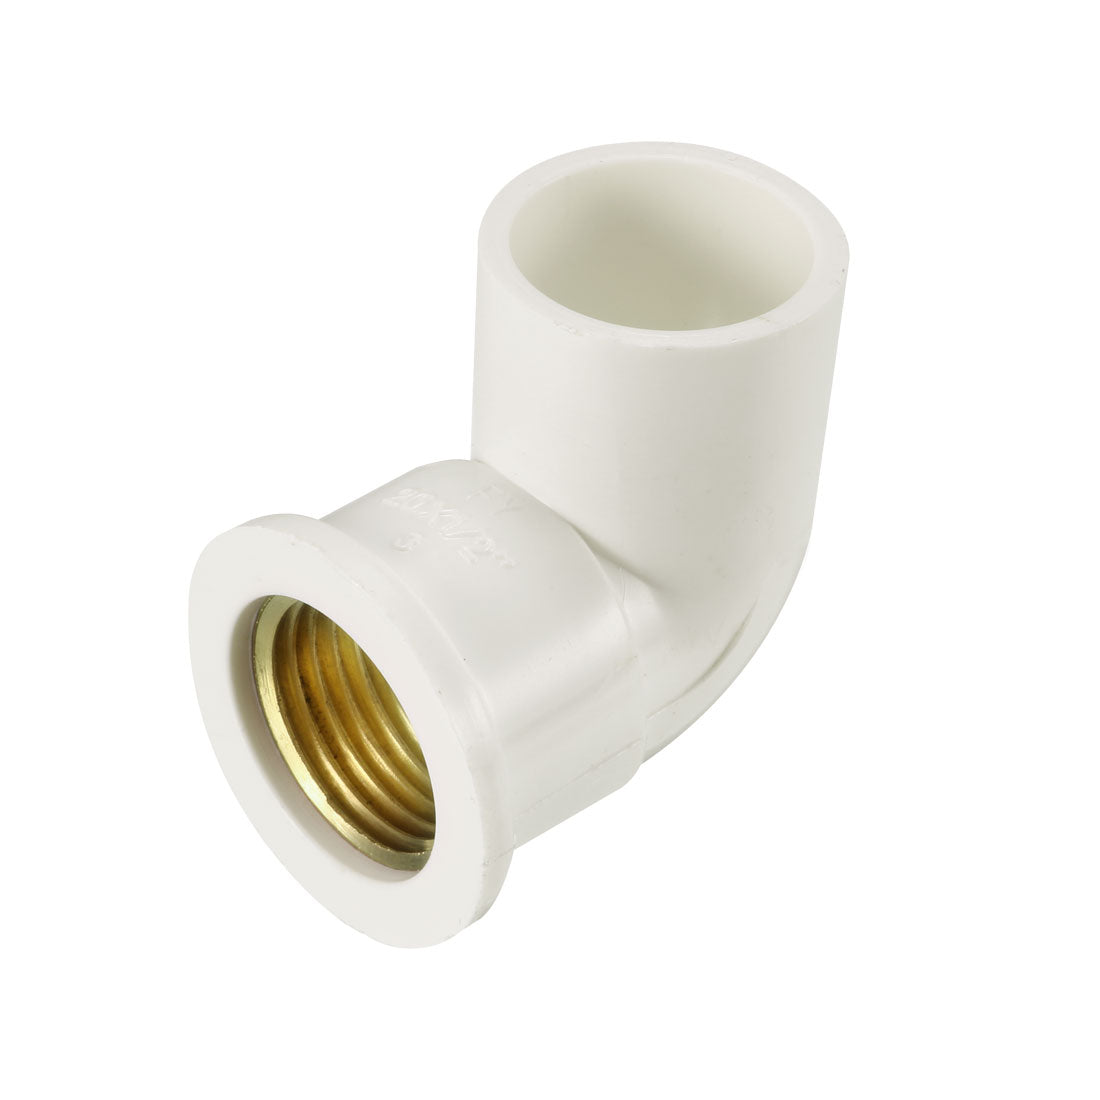 uxcell Uxcell 20mm Slip x 1/2PT Female Thread 90 Degree PVC Pipe Fitting Elbow 2 Pcs